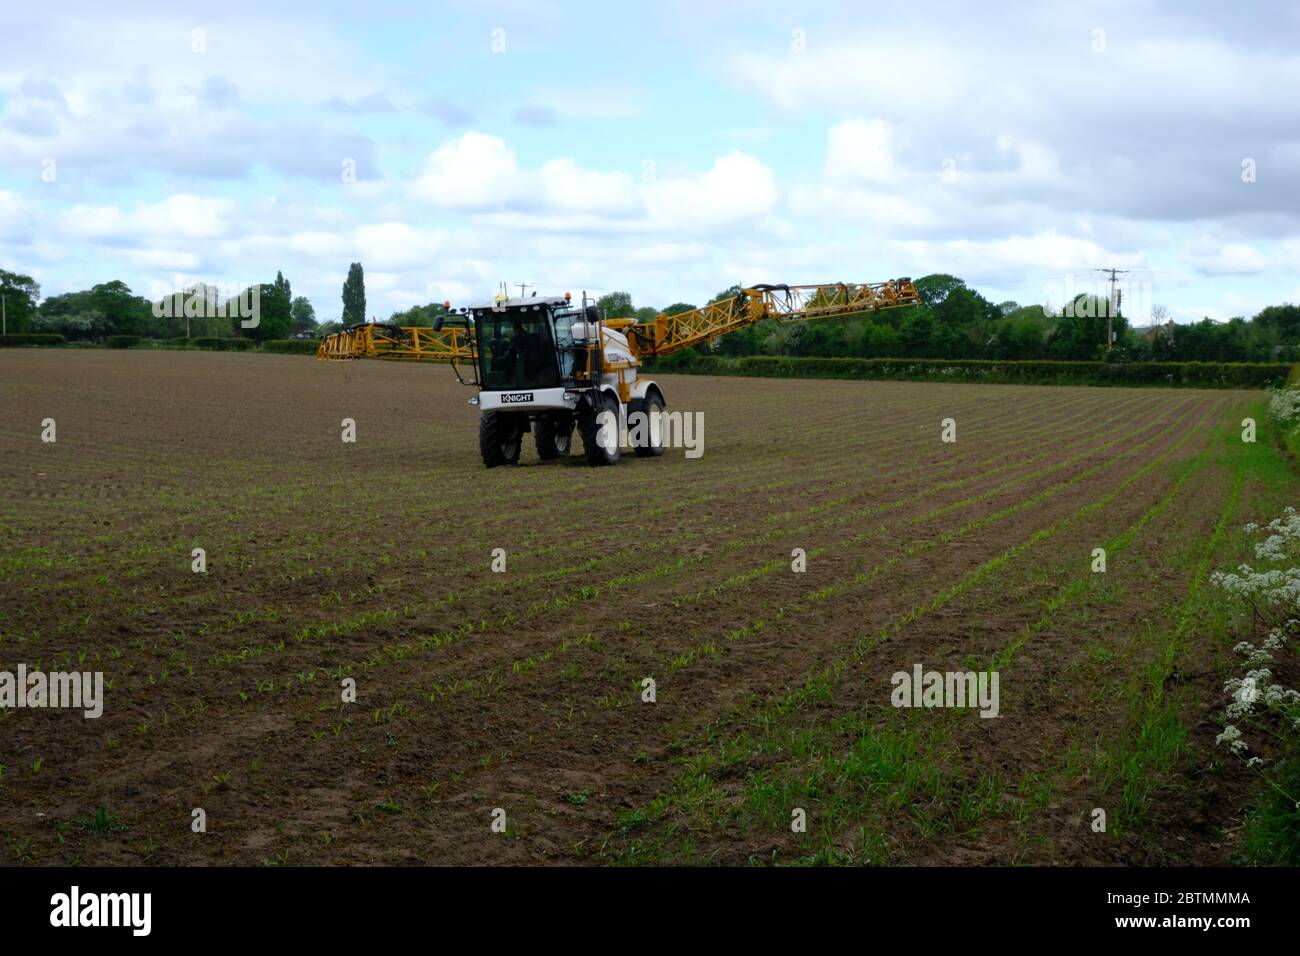 Farm Contractor, Spraying spring sown maize, Agriculture, Farming, Tractor, Chemical, Tending Crops, Maize Crop, Cultivating, Hedge, Hedgerow, Cheshir Stock Photo